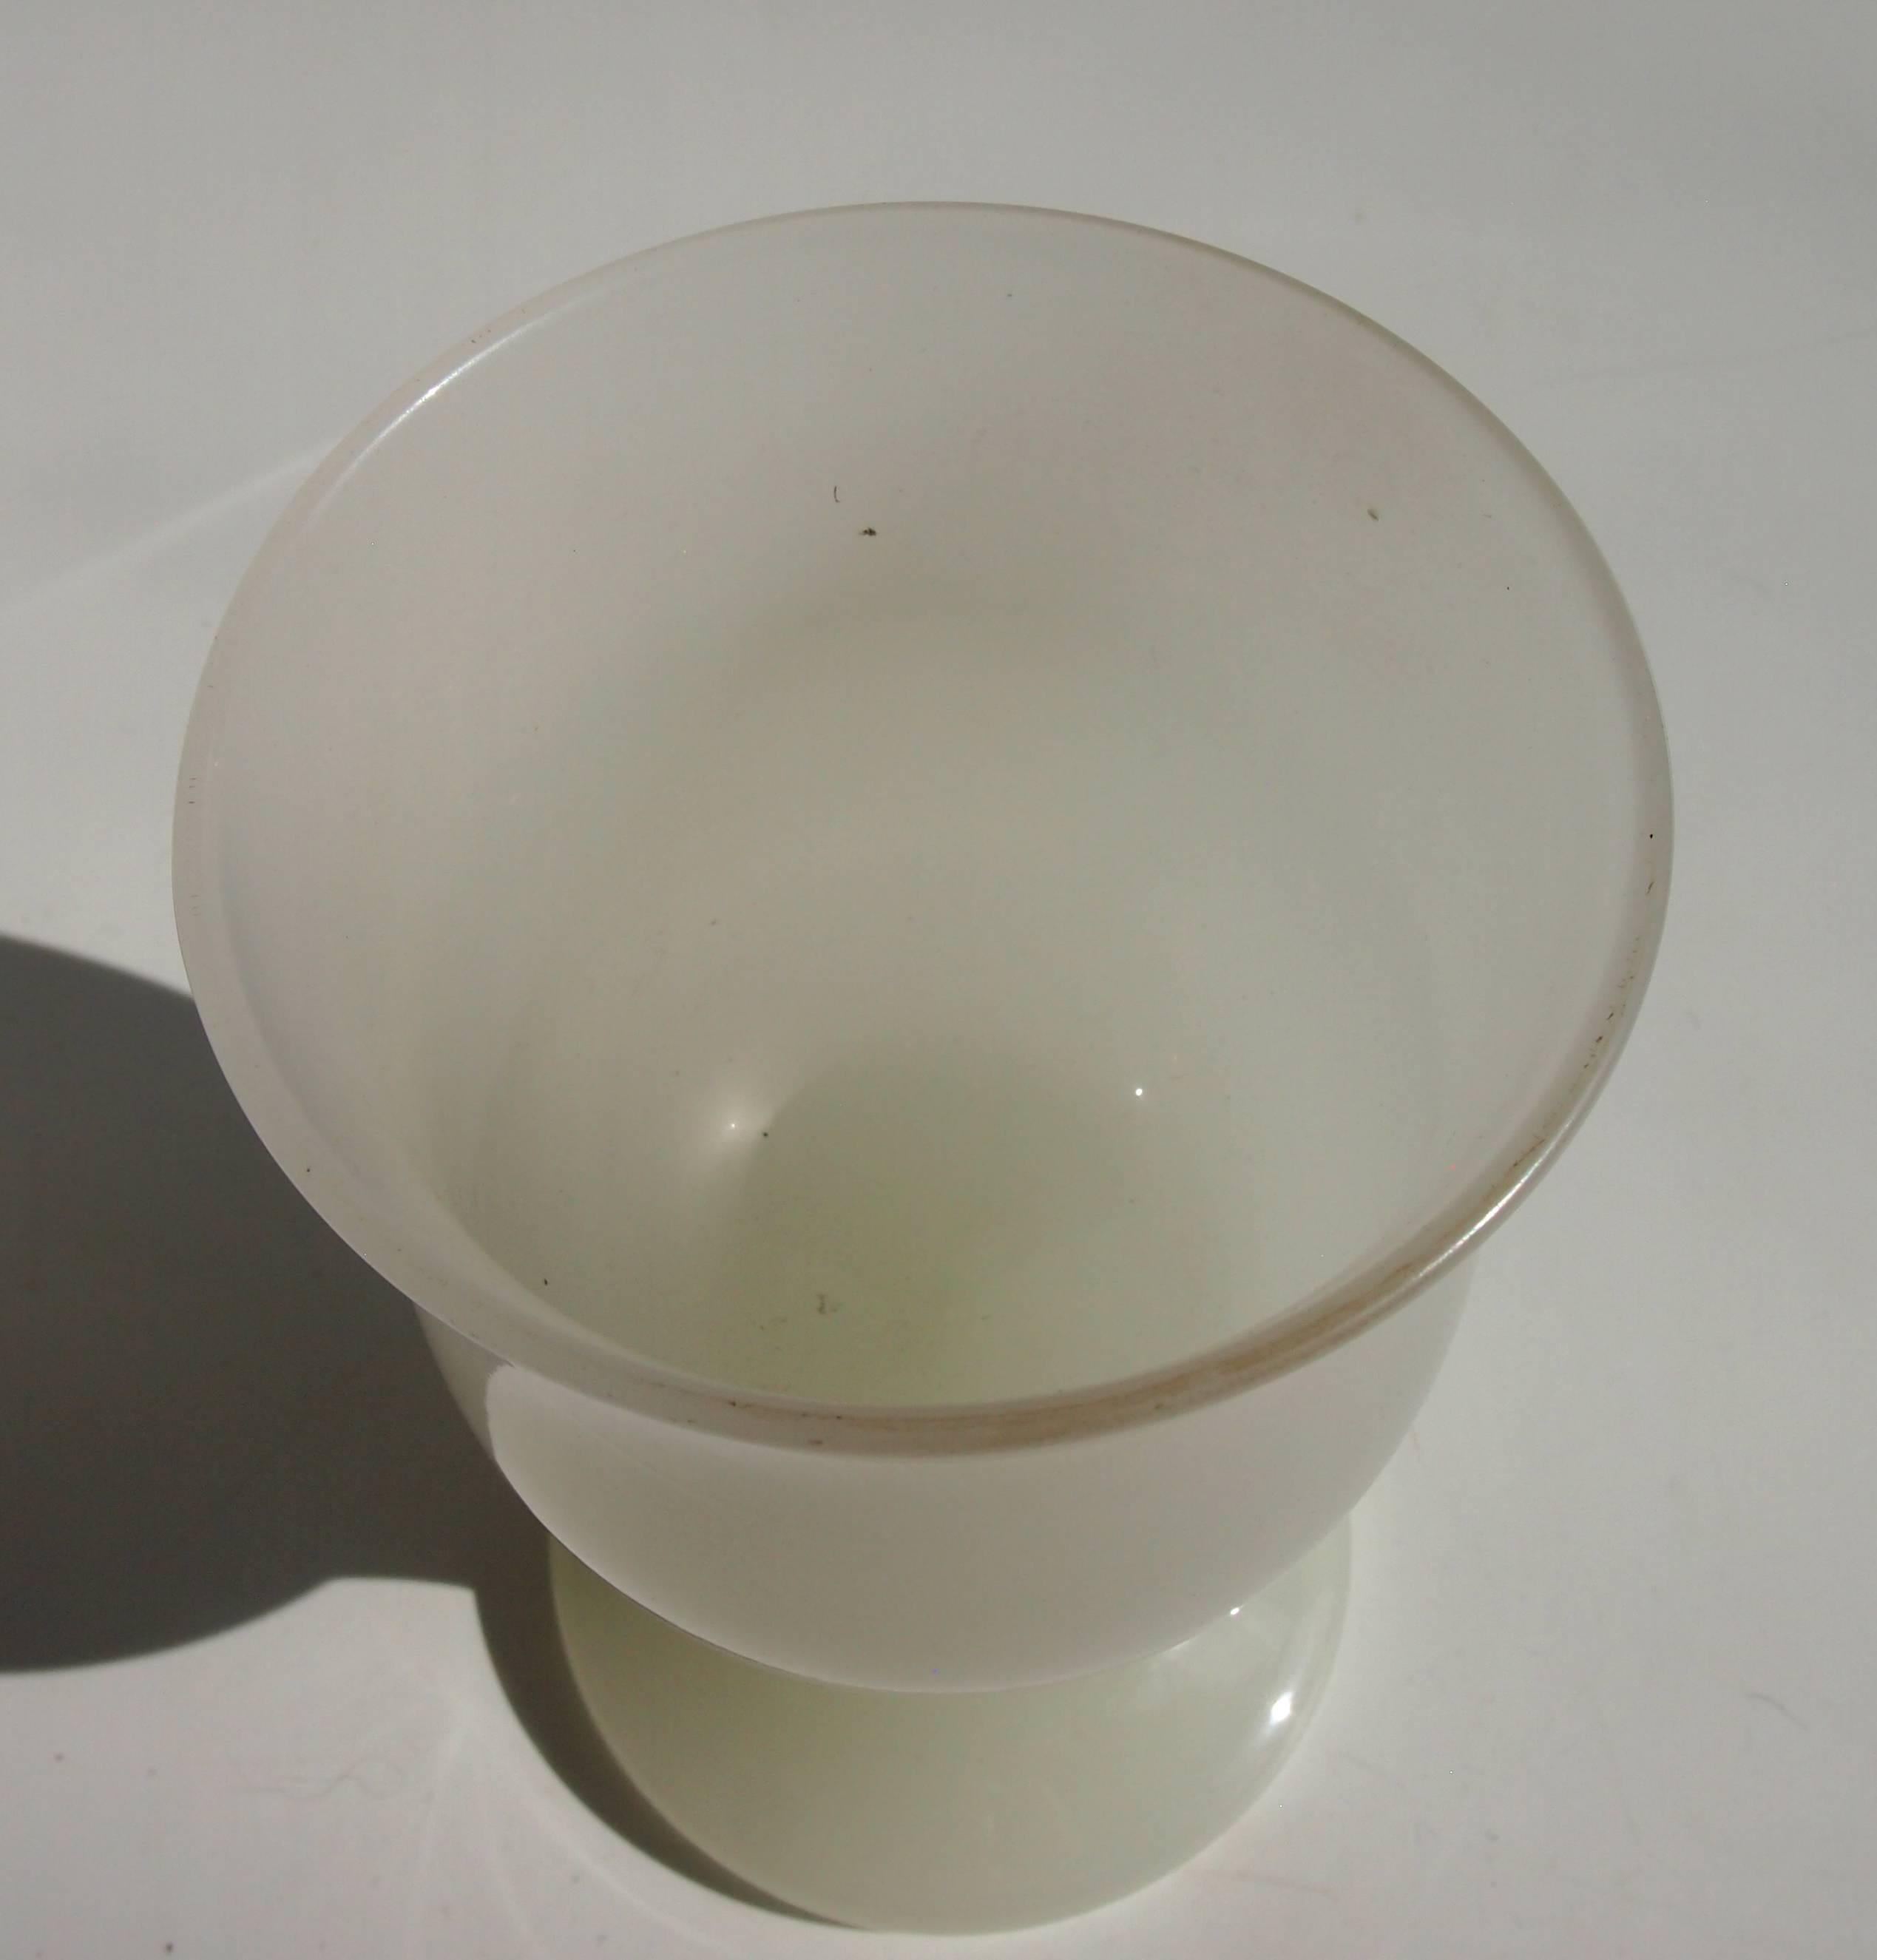 A superb Art Nouveau all white or pale clambroth Alabaster goblet vase by Stevens and Williams originally from their own museum and probably unique. Alabaster glass was first created by Frederick Carder at Stevens and Williams before he emigrated to